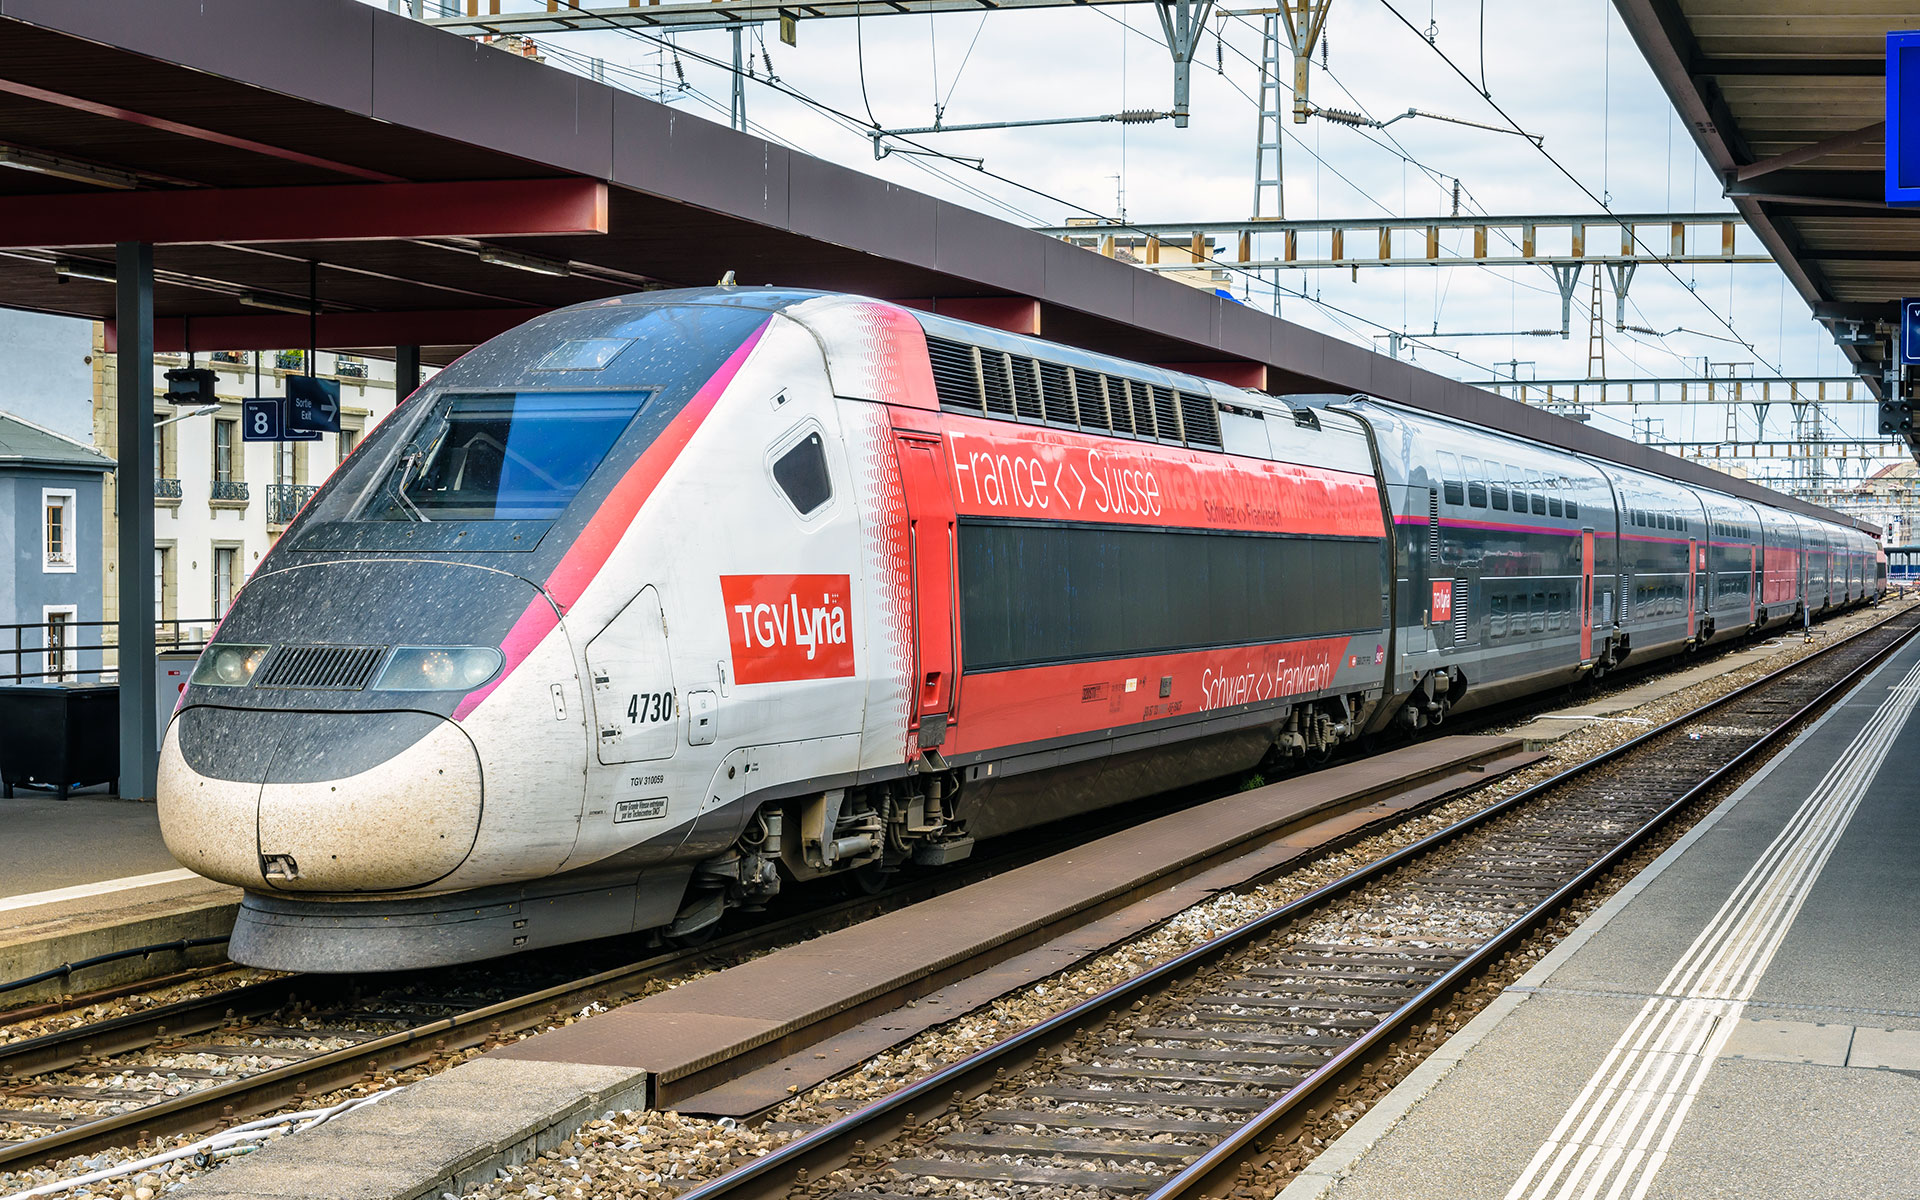 Tickets for TGV Lyria services between France and Switzerland are already bookable for travel right through to April 2022 (photo © Olrat / dreamstime.com).